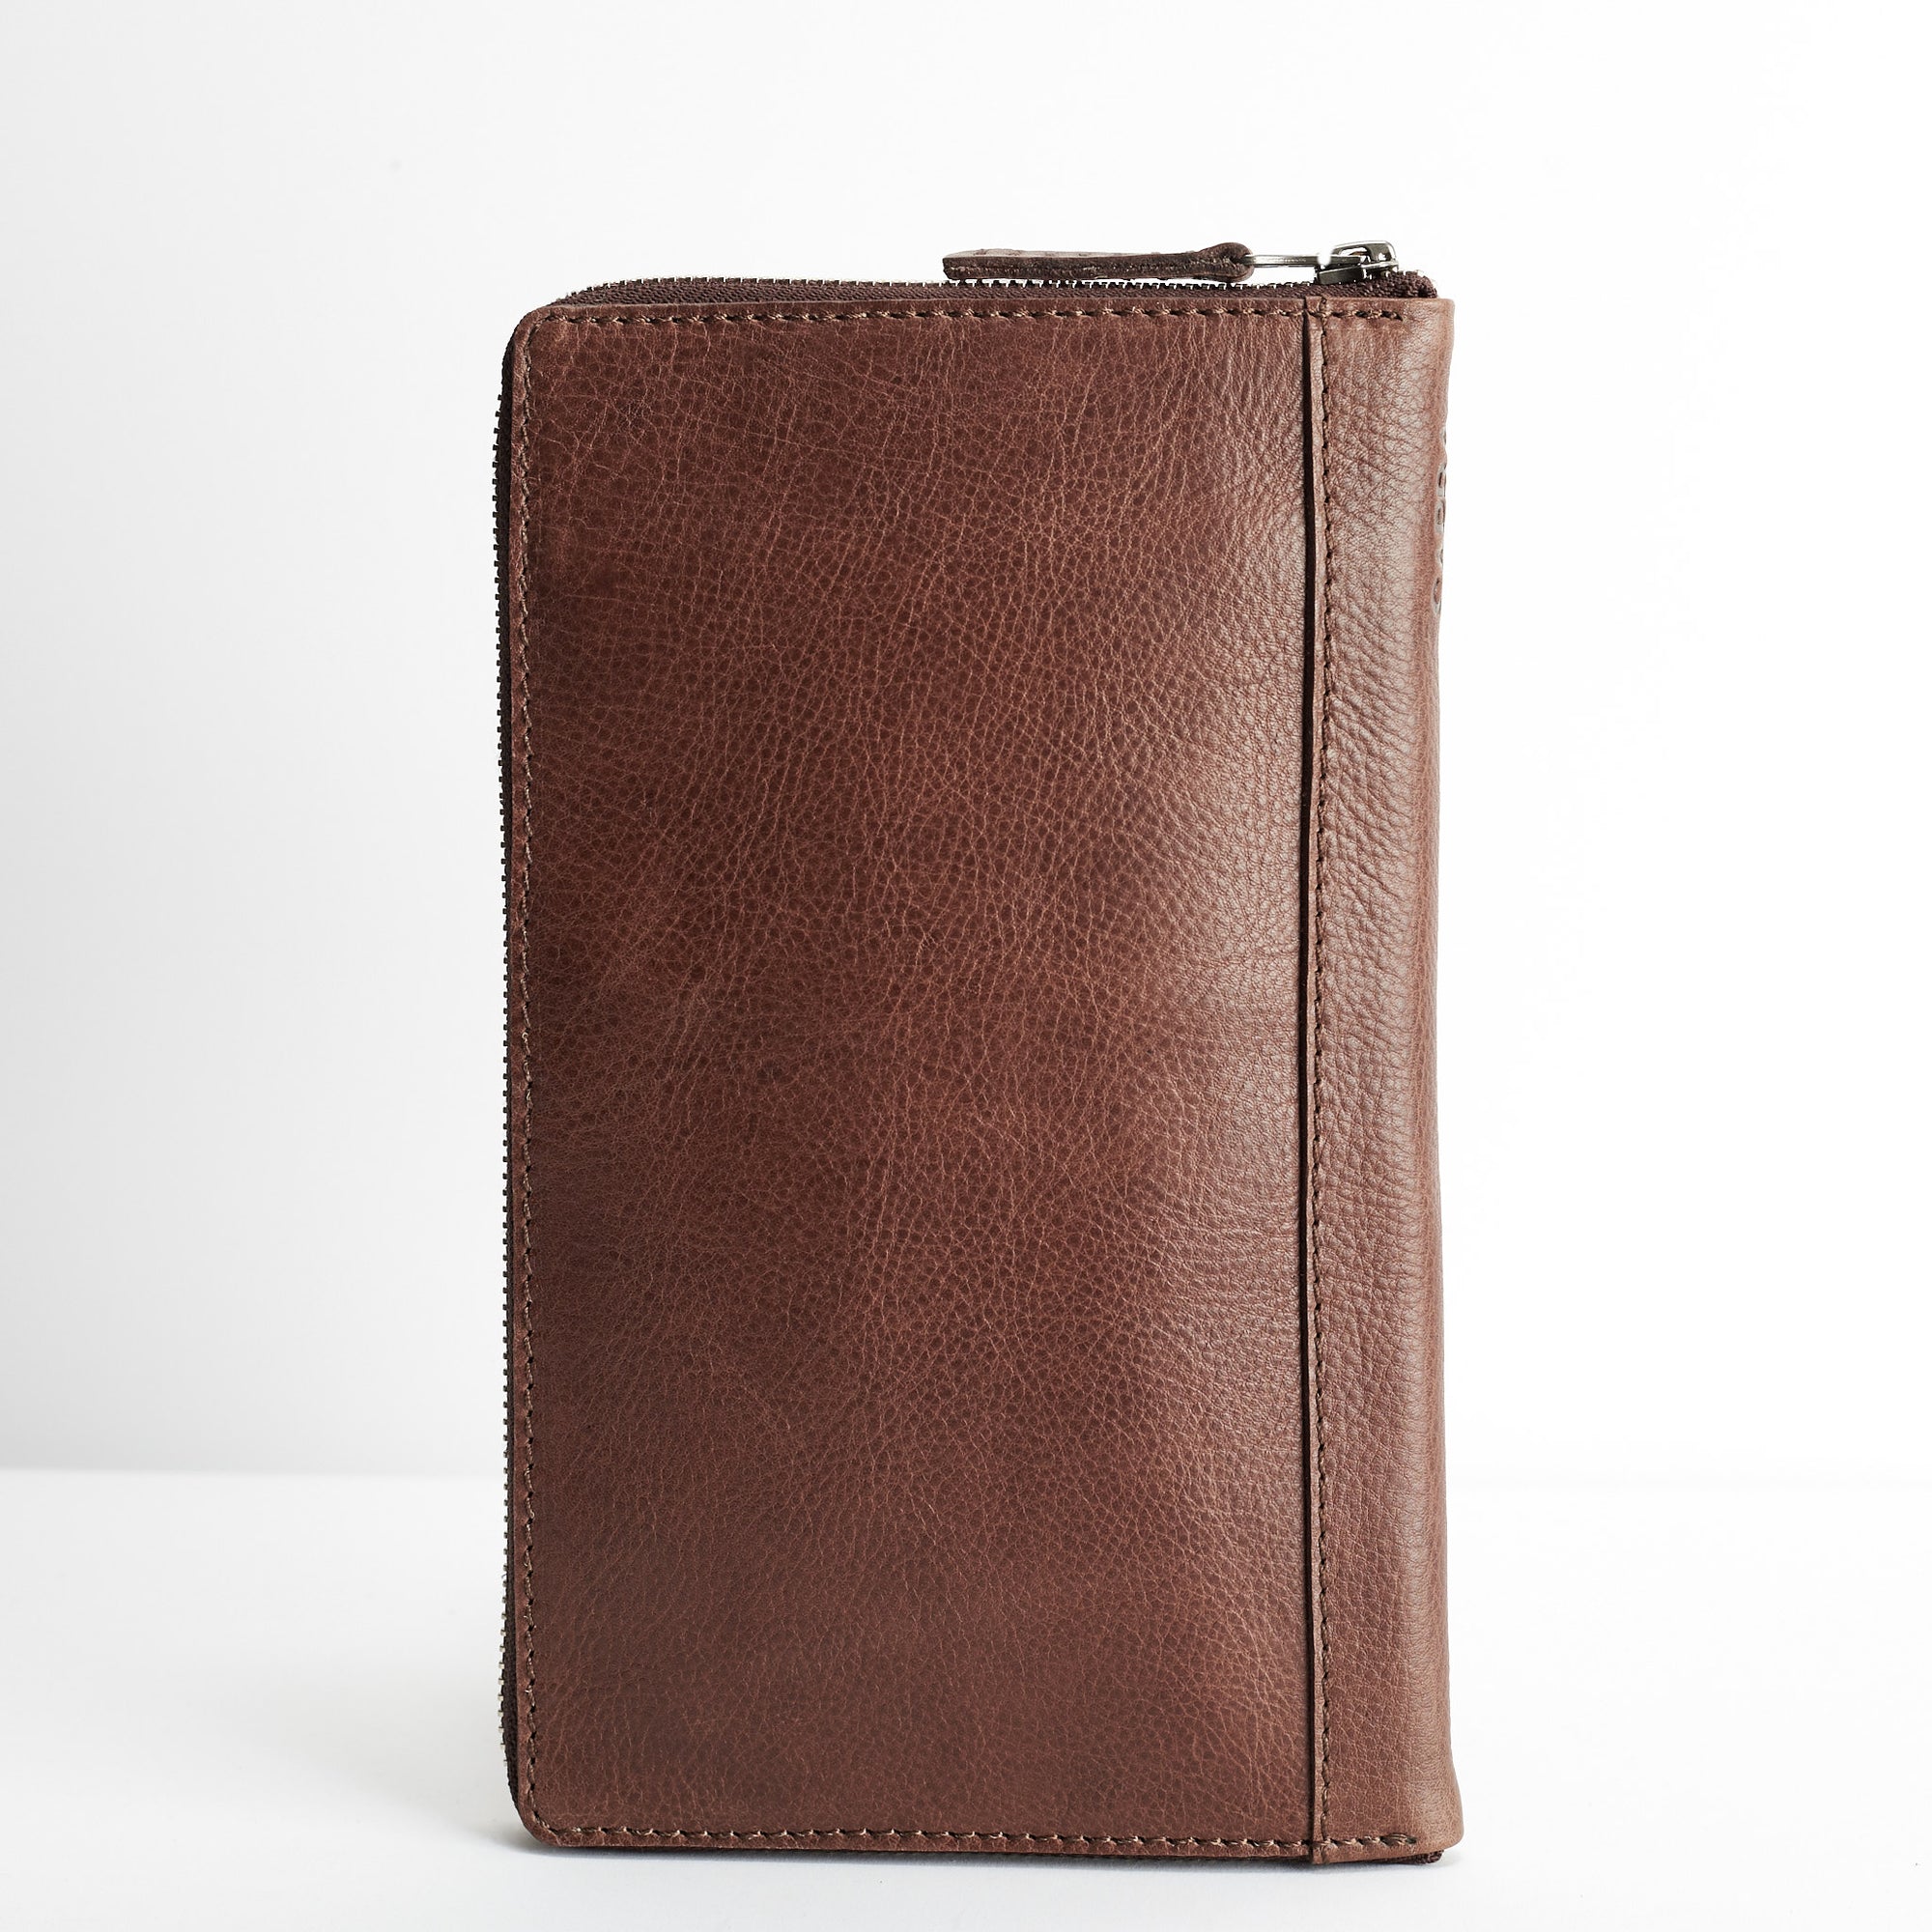 Back. Brown Passport Holder for travelers, document organizer, travel journal by Capra Leather